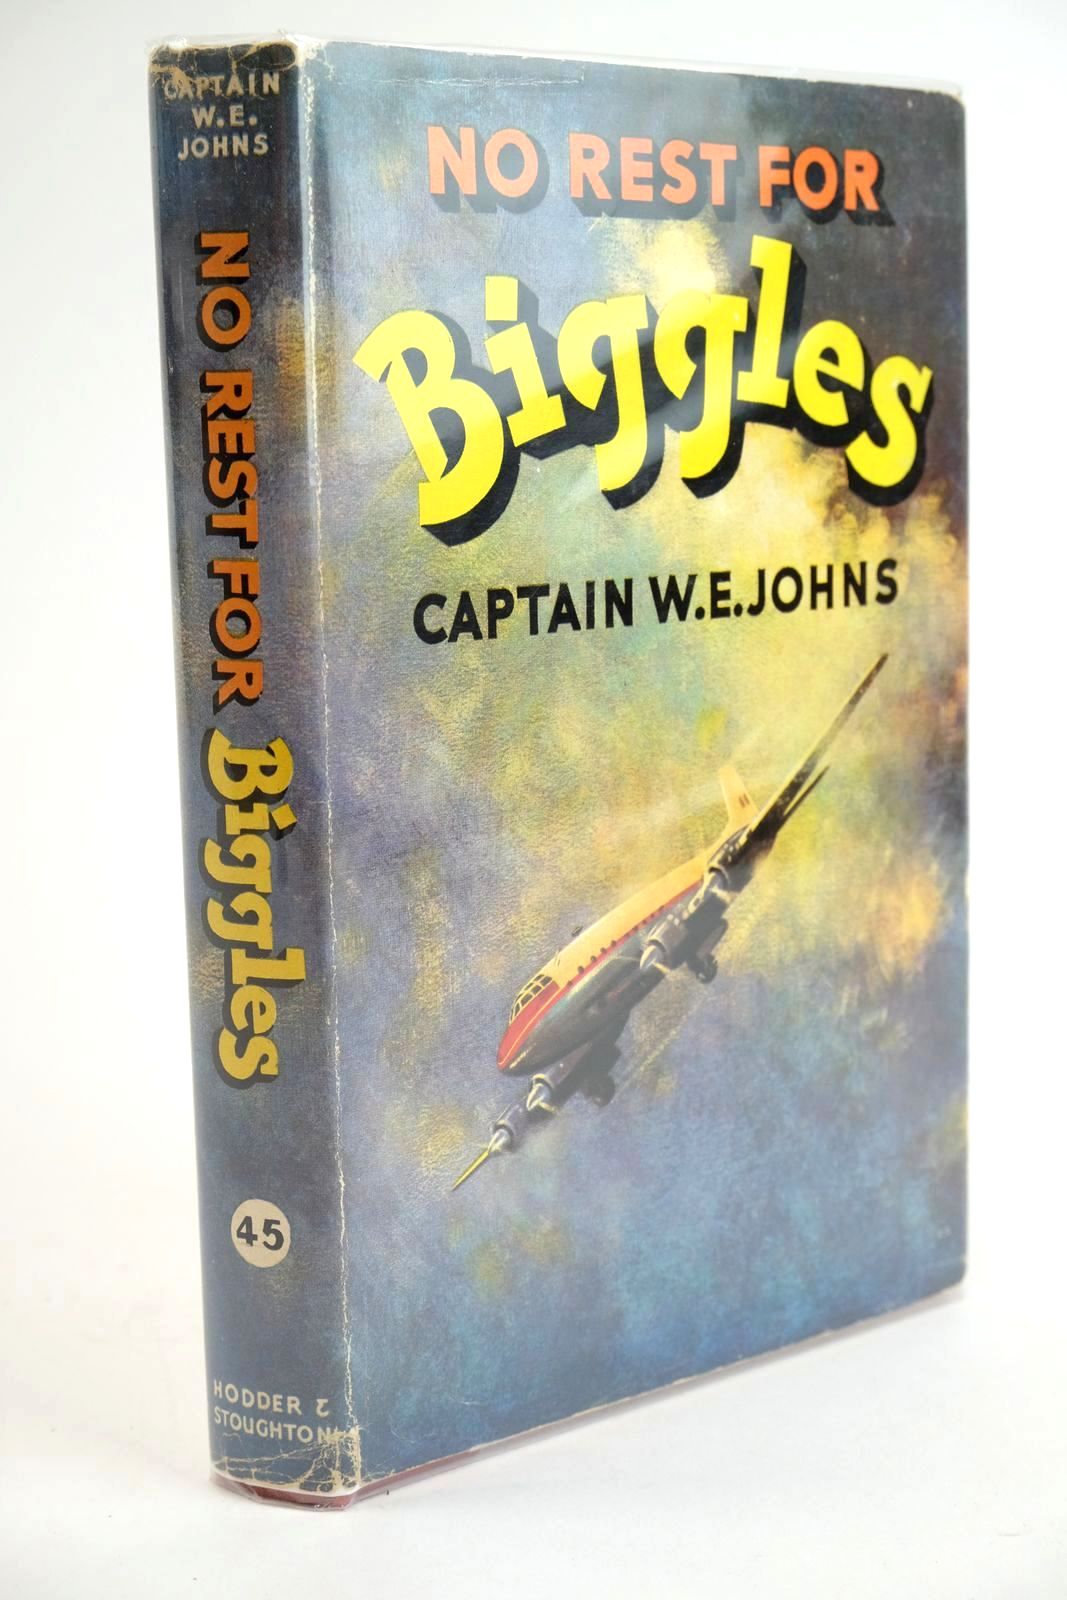 Photo of NO REST FOR BIGGLES written by Johns, W.E. illustrated by Stead,  published by Hodder & Stoughton (STOCK CODE: 1323429)  for sale by Stella & Rose's Books